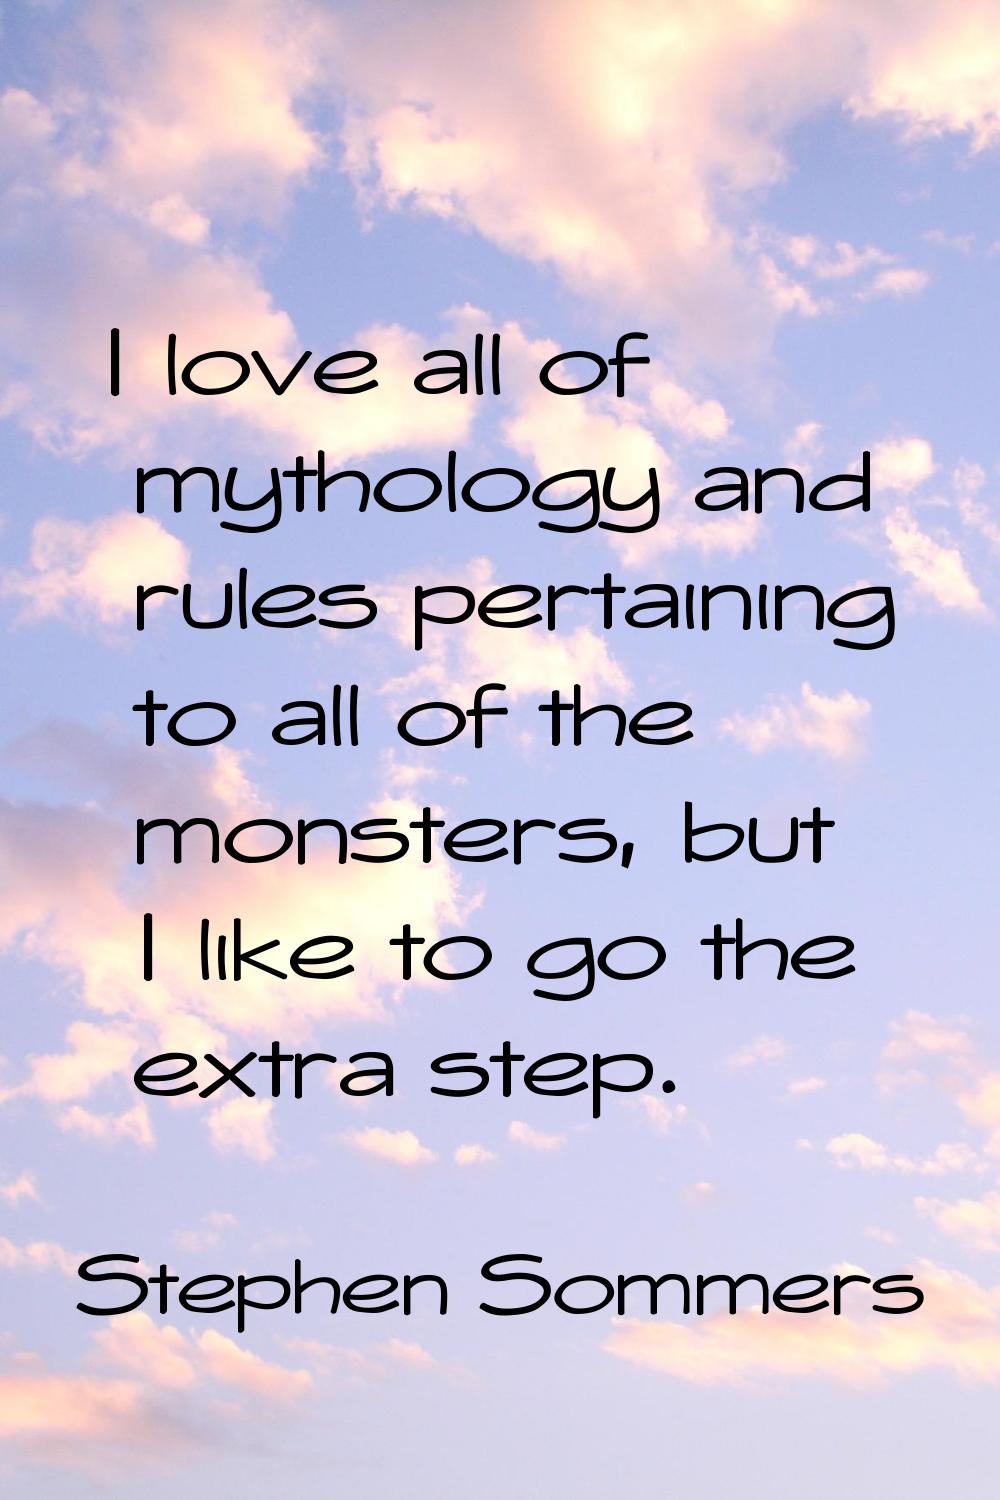 I love all of mythology and rules pertaining to all of the monsters, but I like to go the extra ste